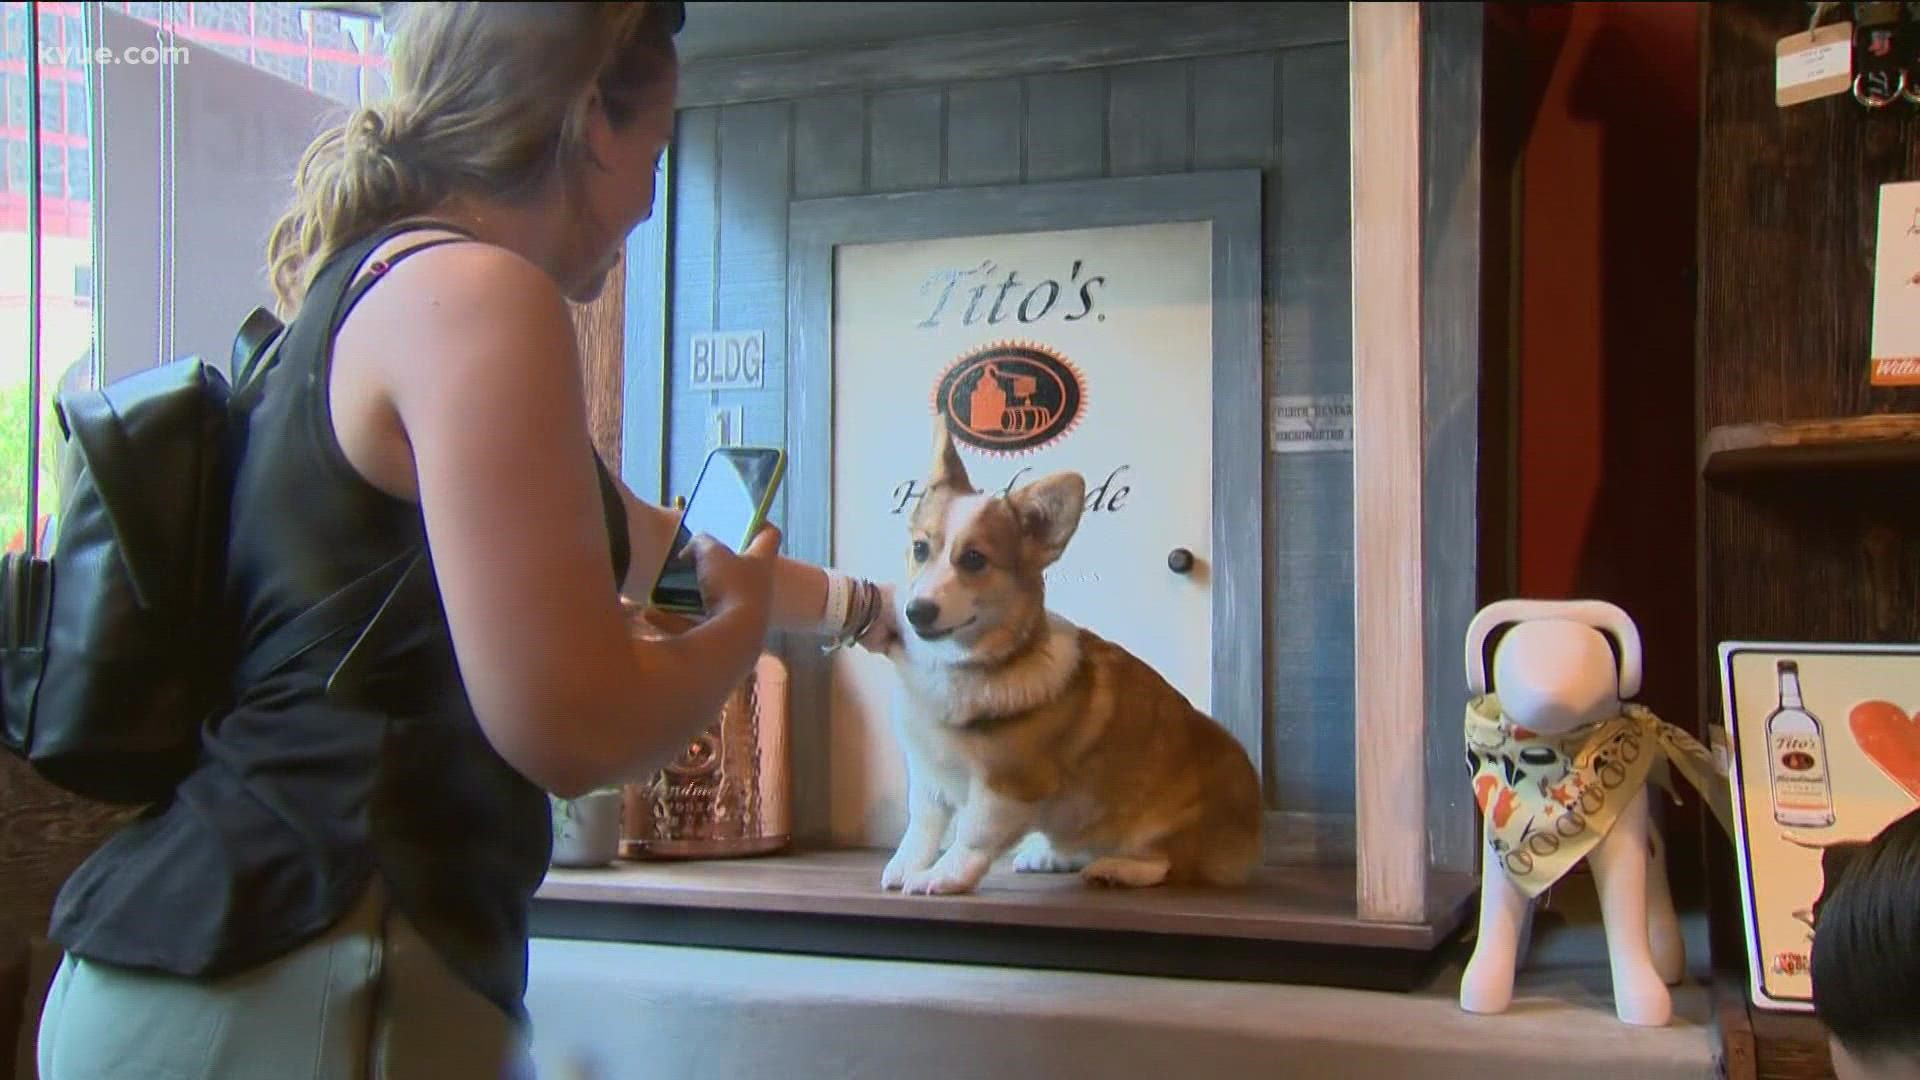 Austin's own Tito's Handmade Vodka hosted a mixer for dogs that share its name.